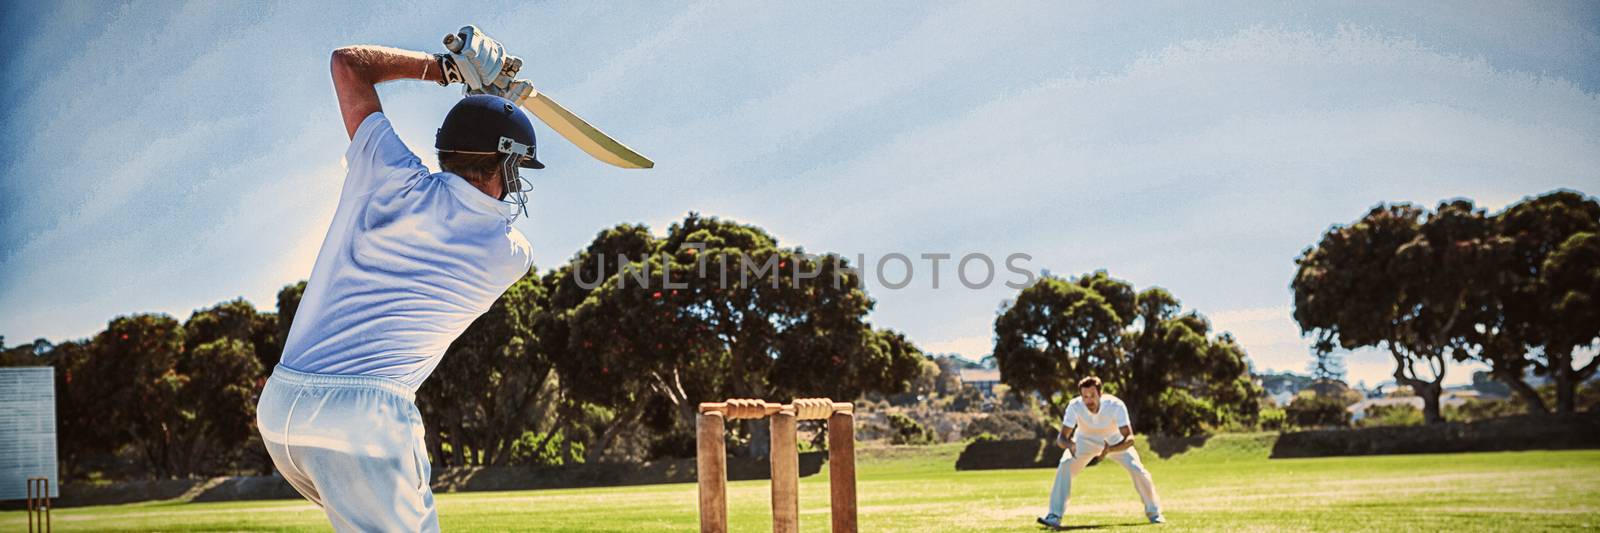 Player batting while playing cricket on field by Wavebreakmedia